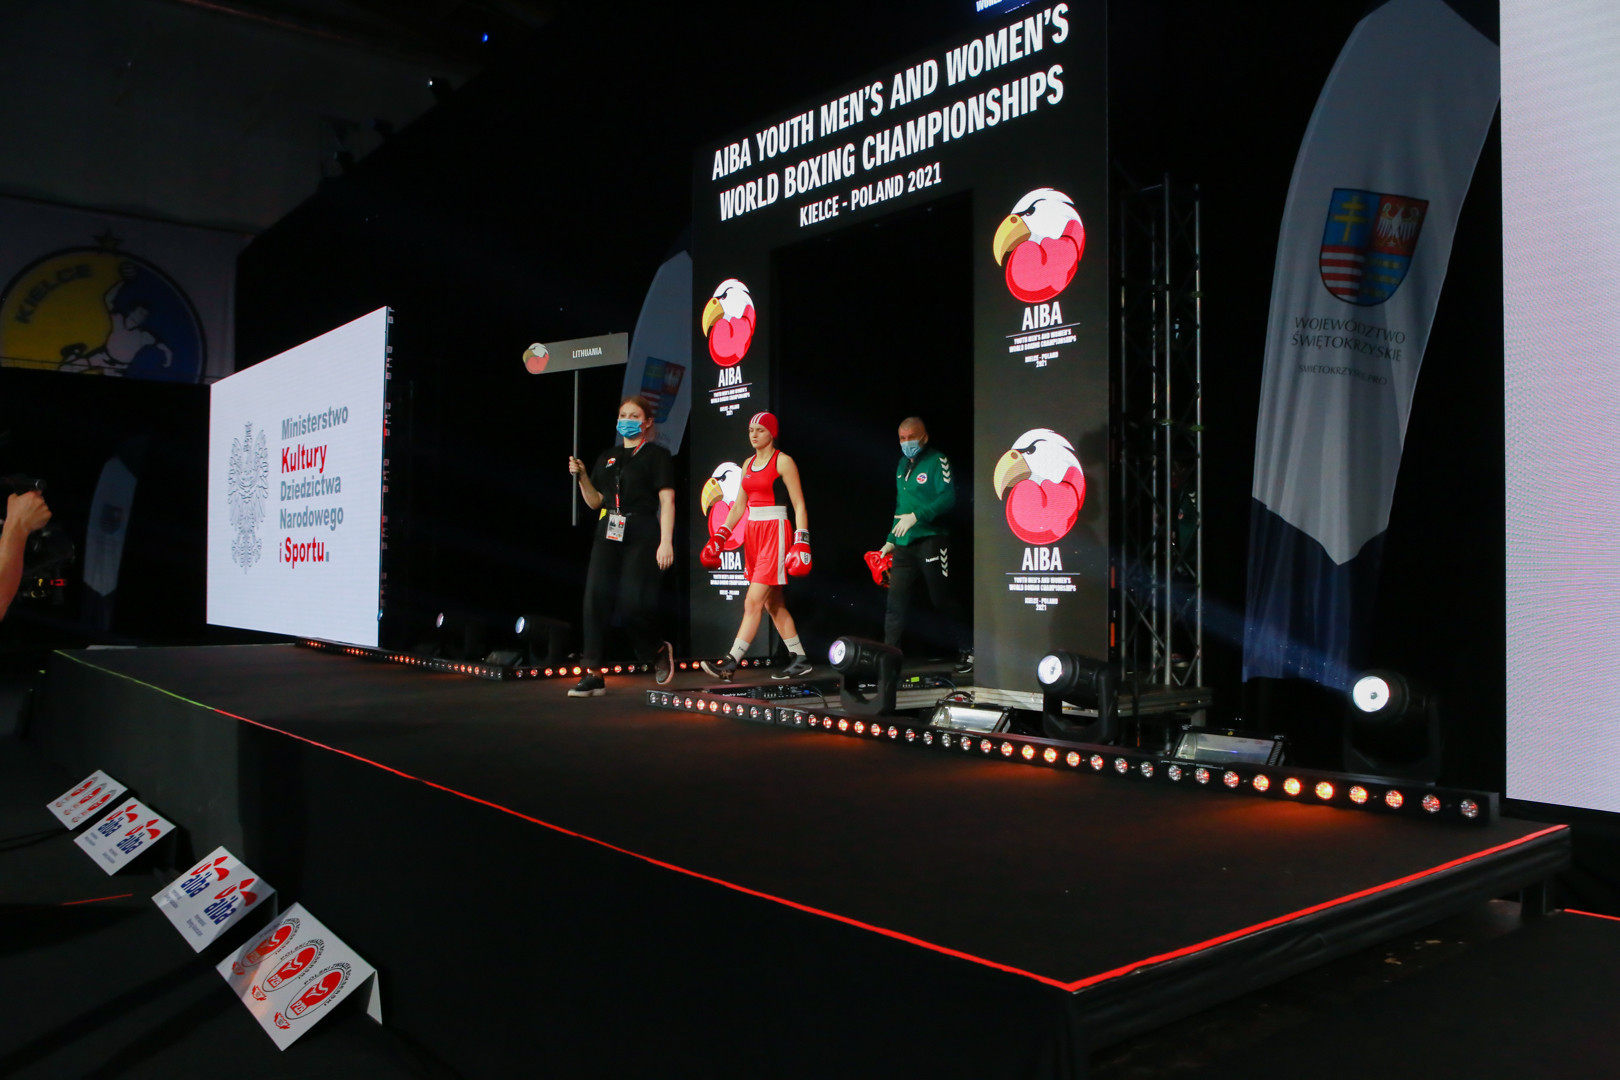 The event is taking place without spectators but AIBA are still putting on a show ©AIBA